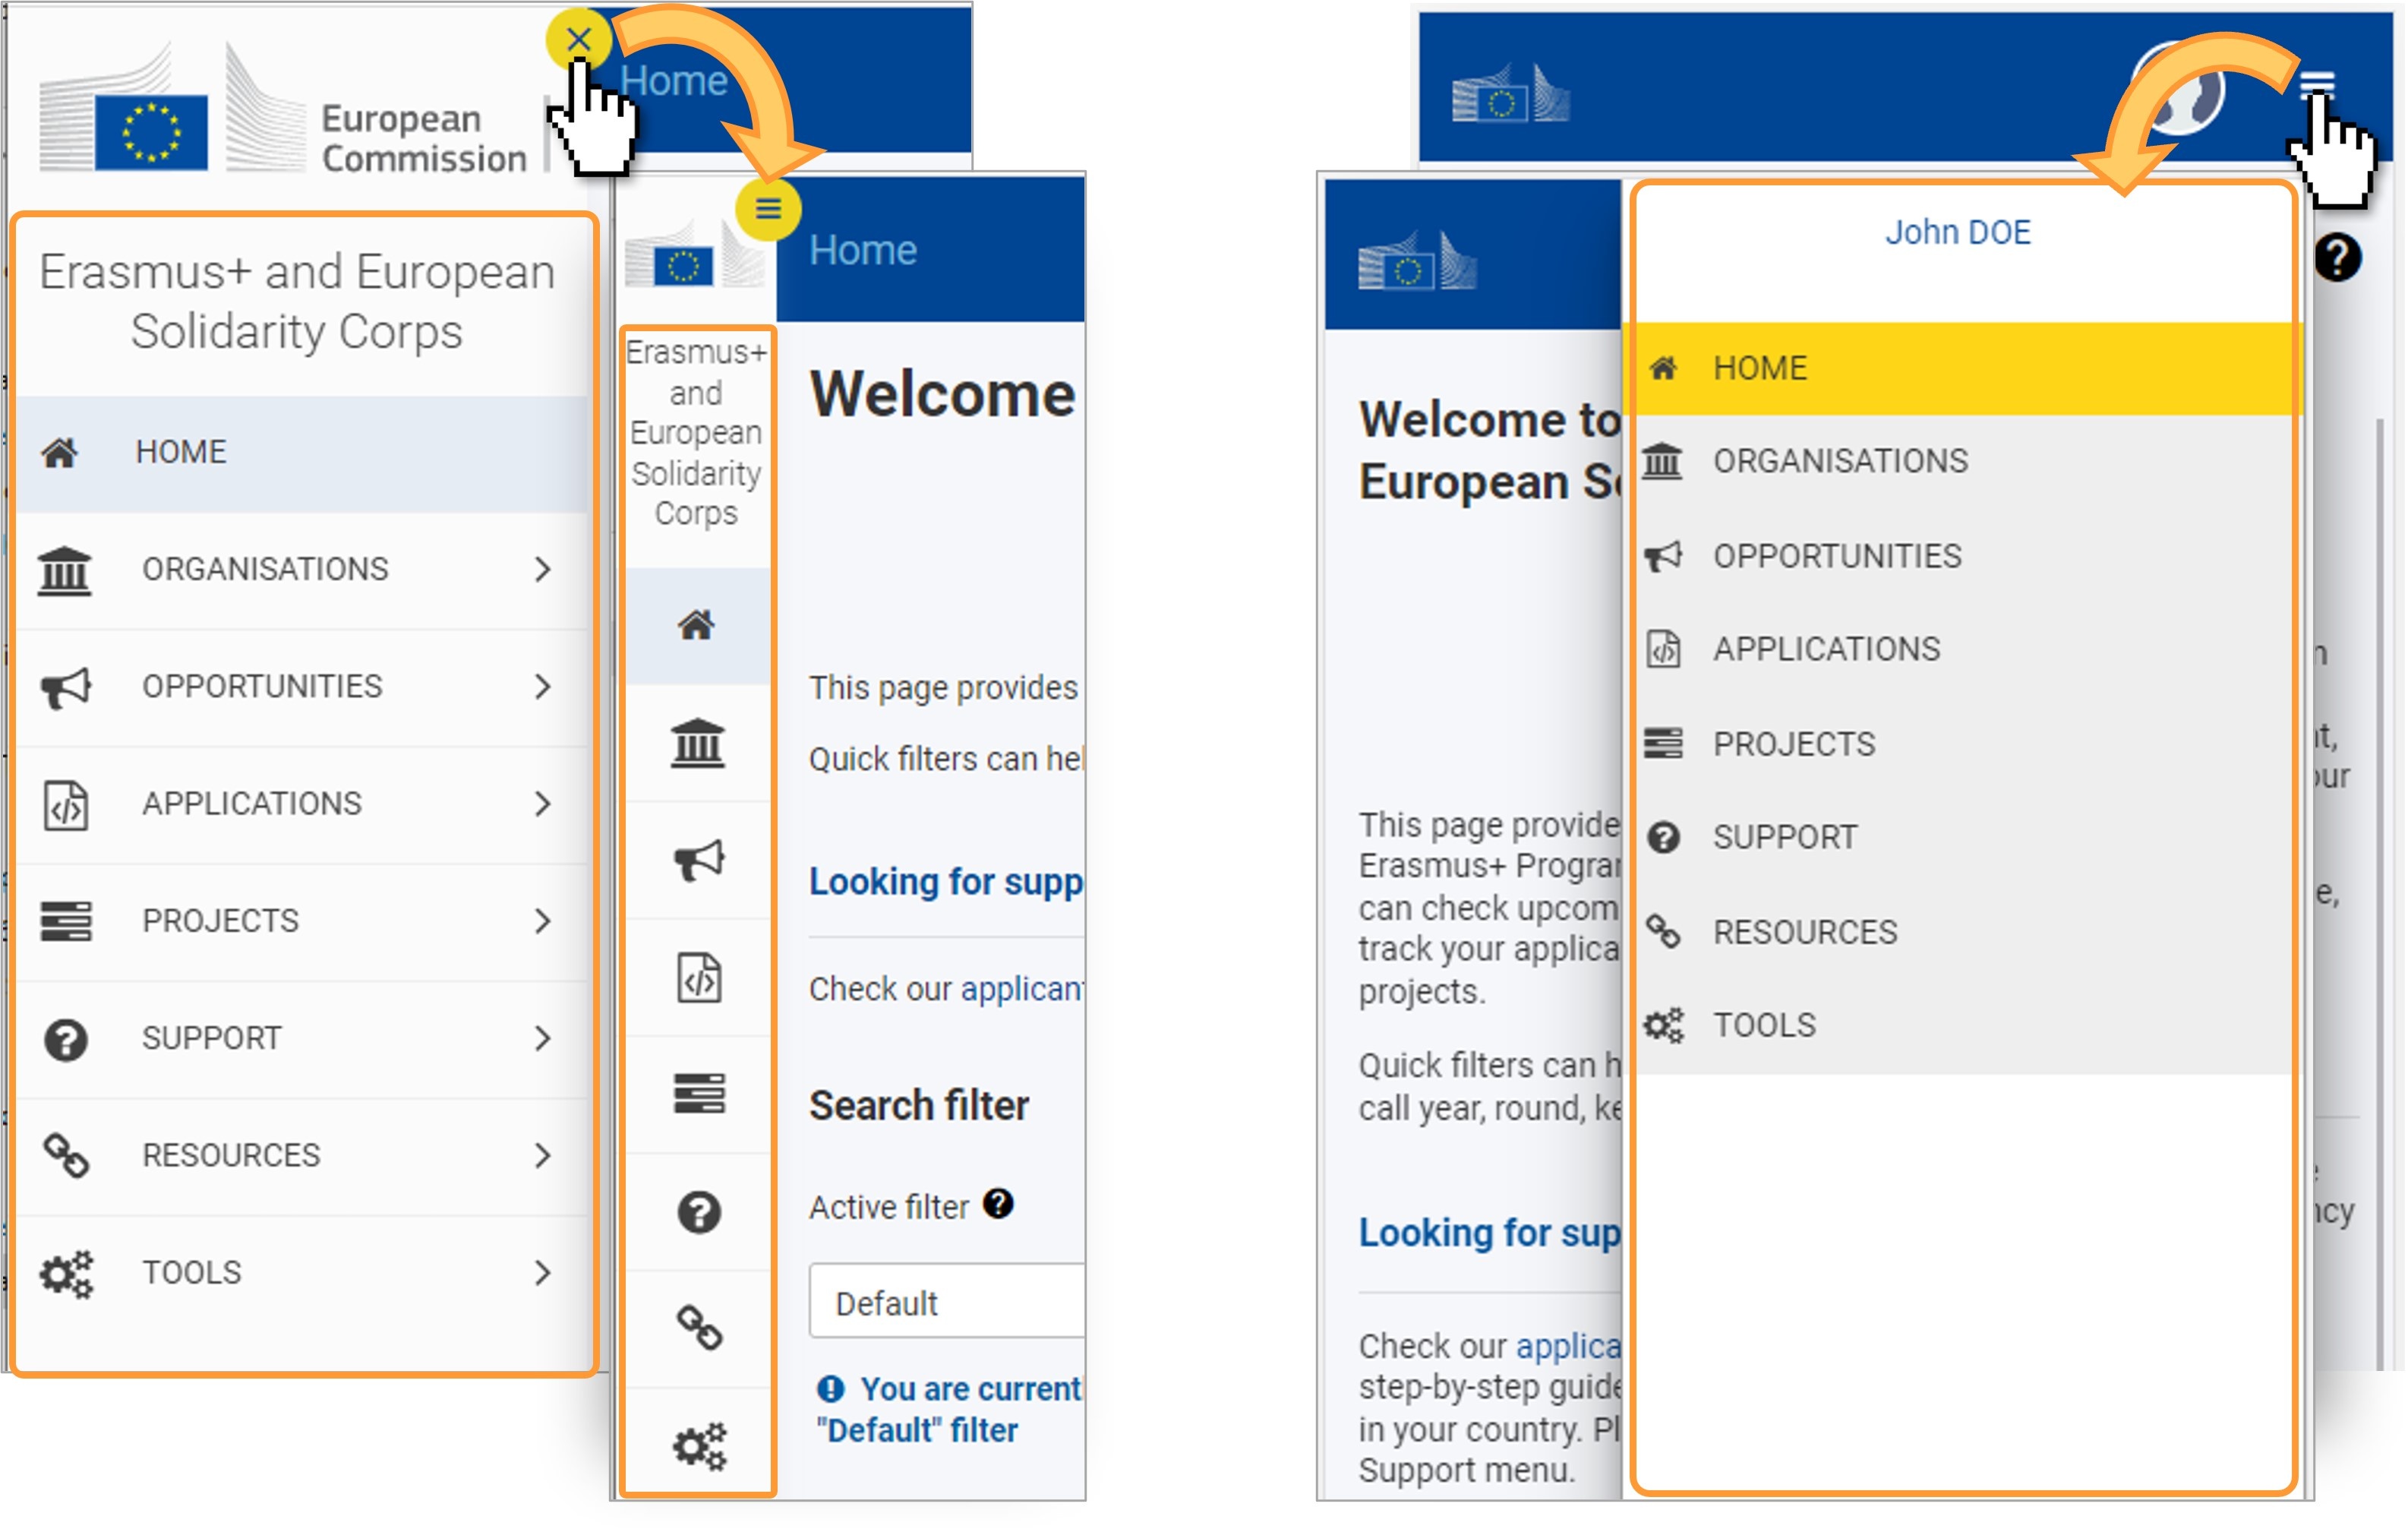 Menu display on desktop computer (left) and mobile device (right) for applicants and beneficiaries